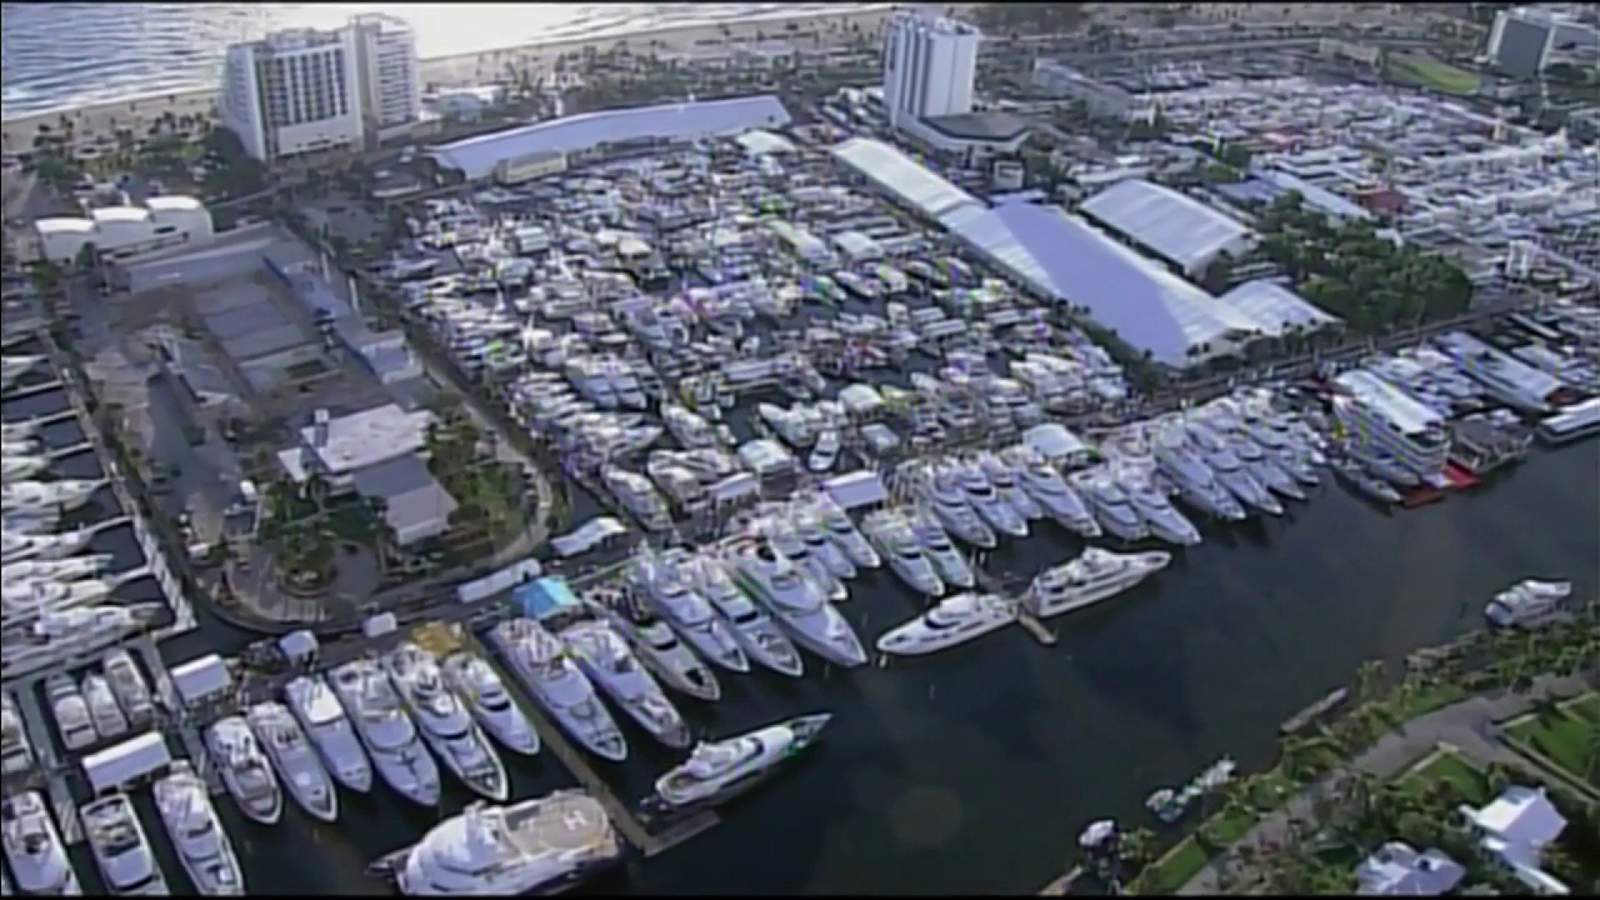 Fort Lauderdale International Boat Show to sail through pandemic with new safety rules